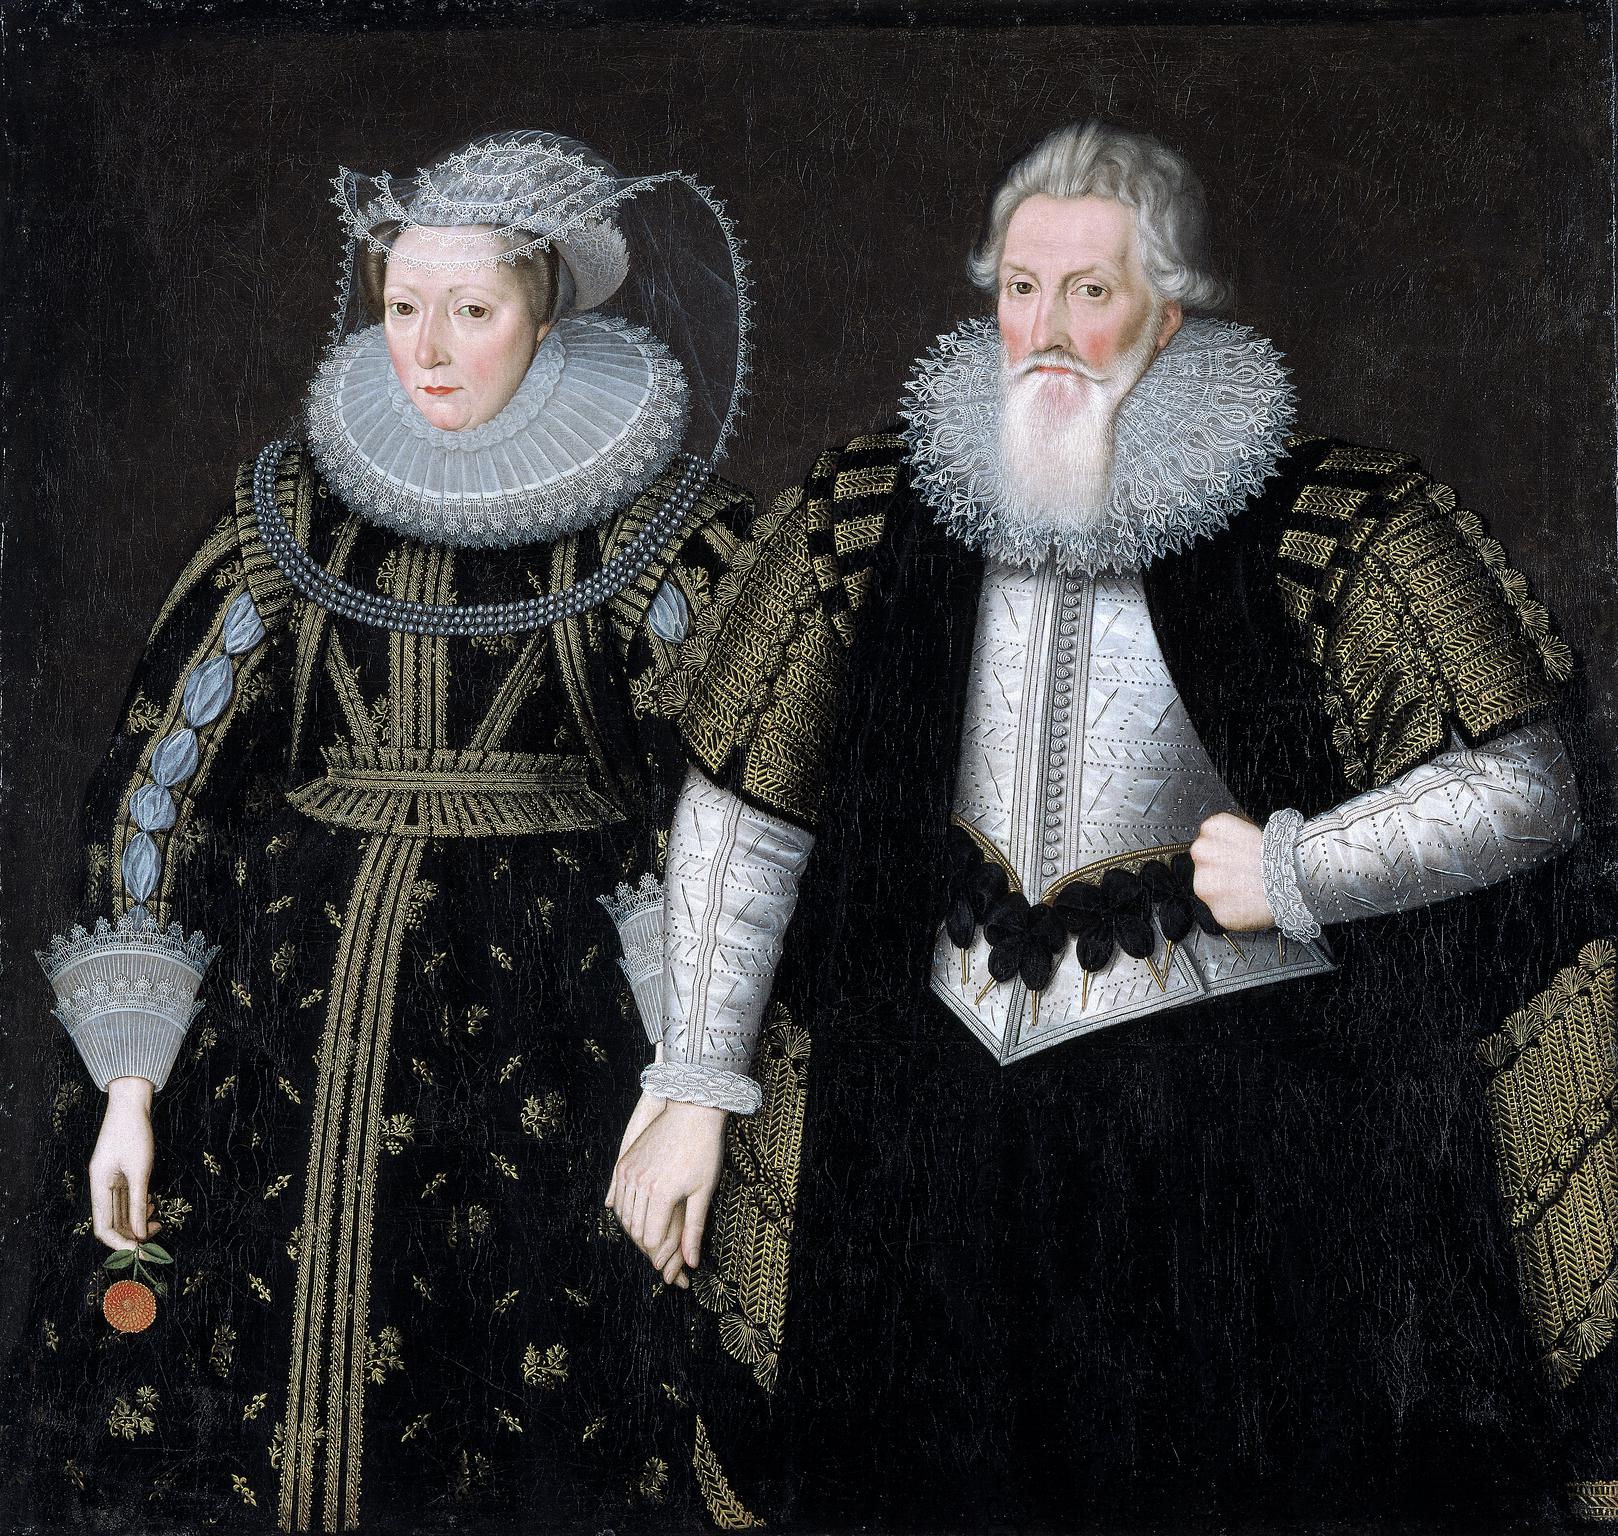 Sir Thomas Mansel (1556-1631) and his wife Jane, Lady Mansel